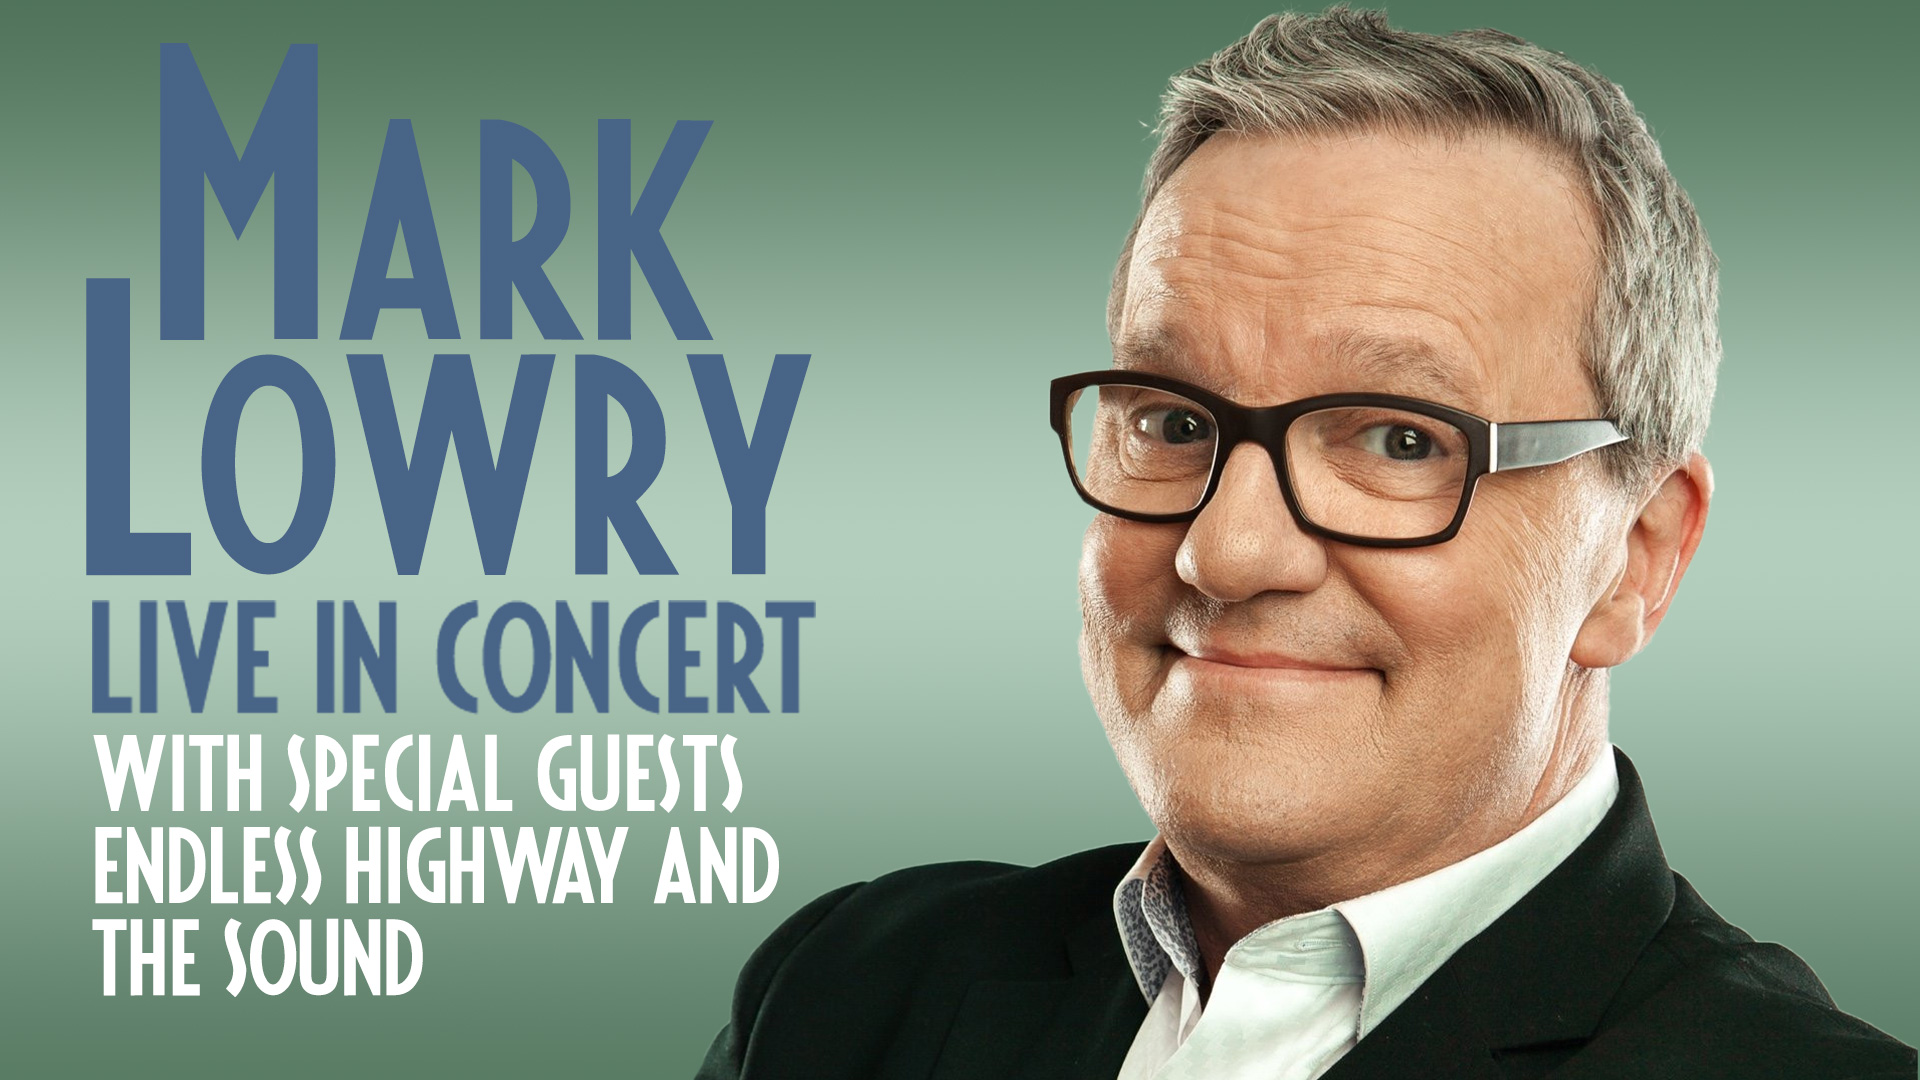 Mark Lowry with special guests Endless Highway and The Sound